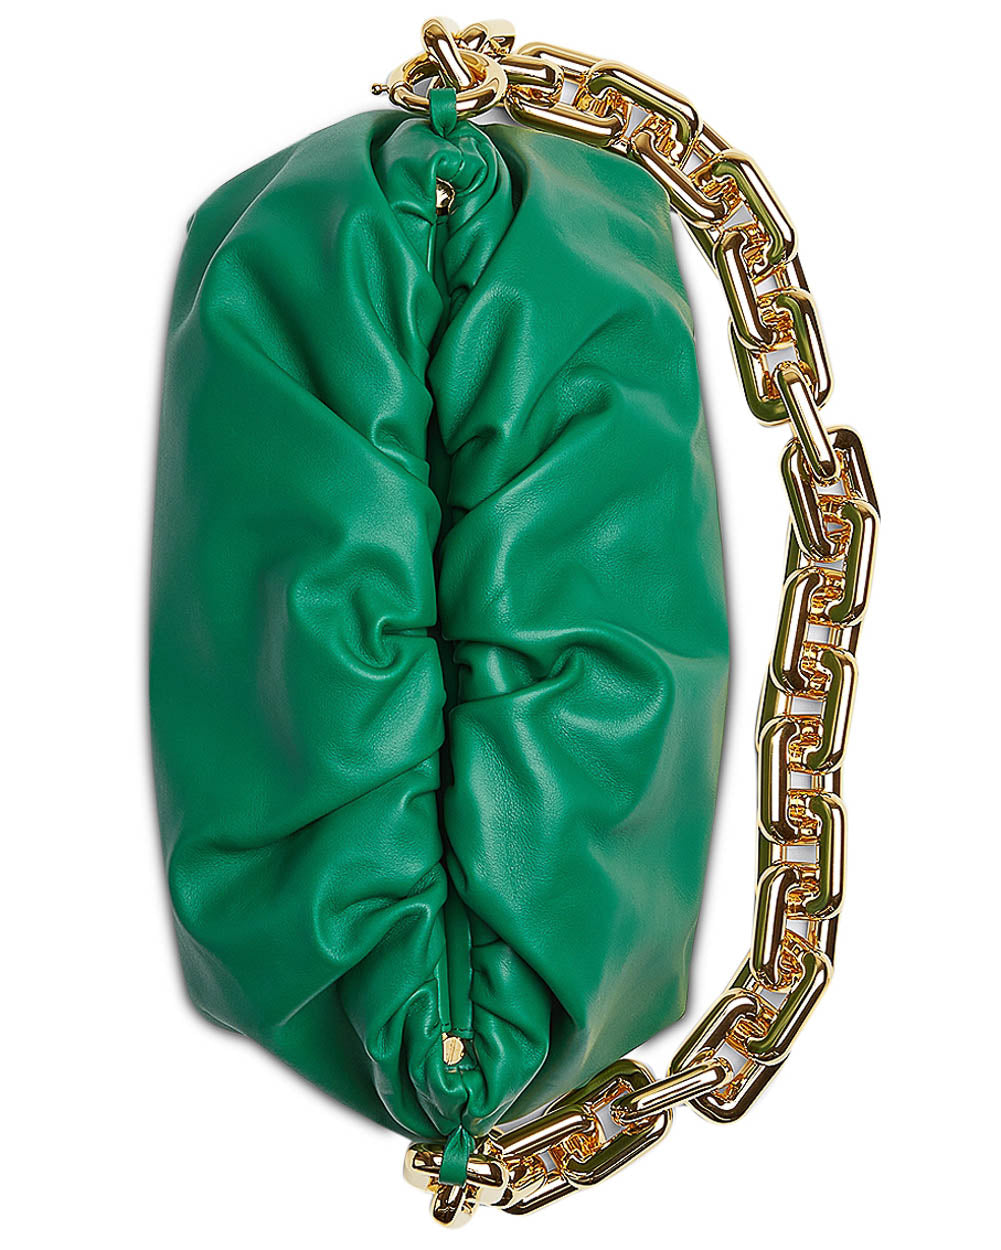 The Chain Pouch in Racing Green